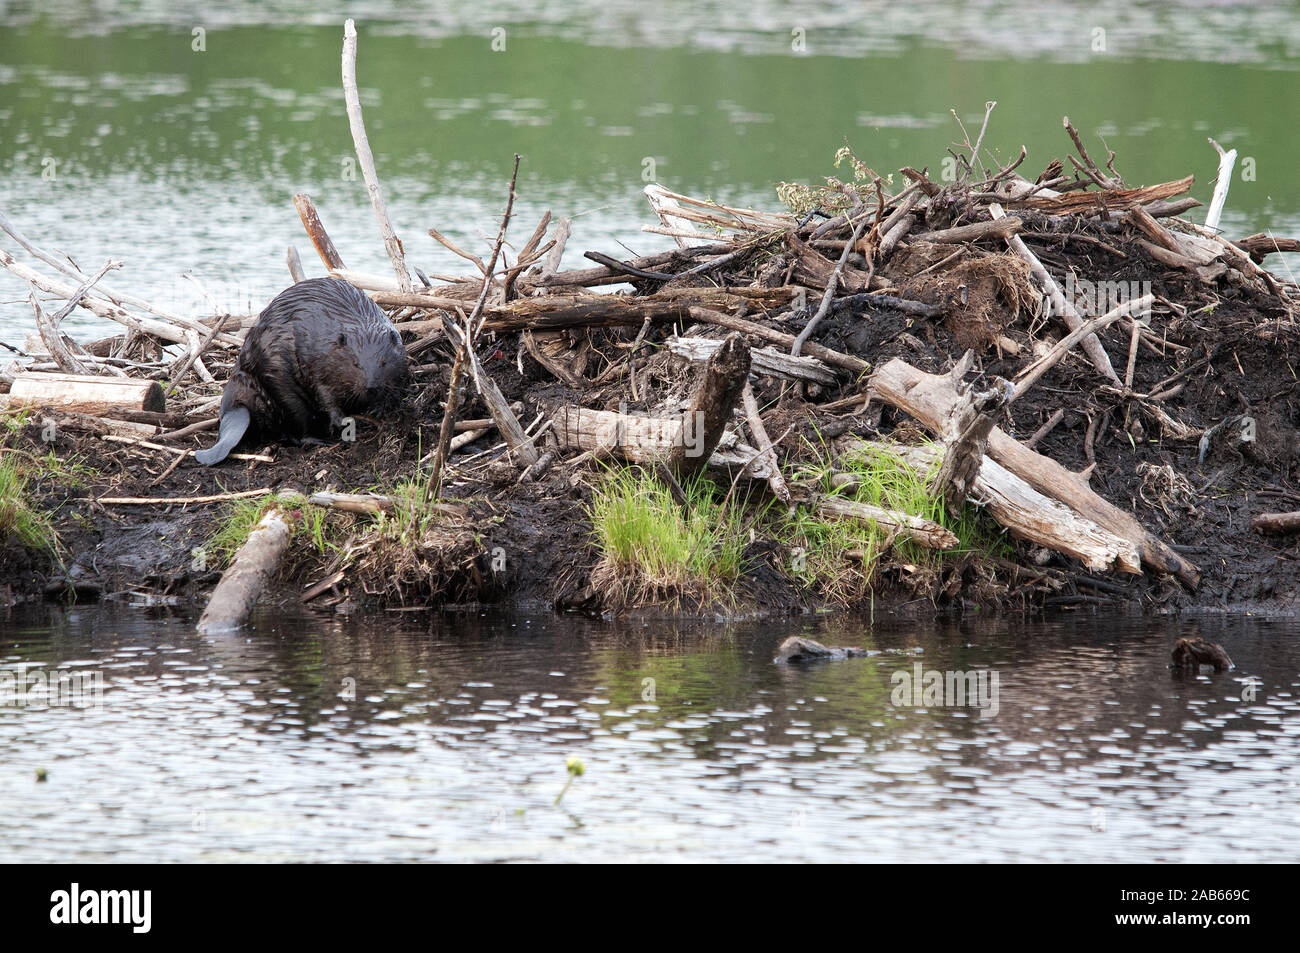 Beaver wild beaver building dam and den while exposing its body, head, eyes, ears, tail with a nice background  in its environment and surrounding. Stock Photo